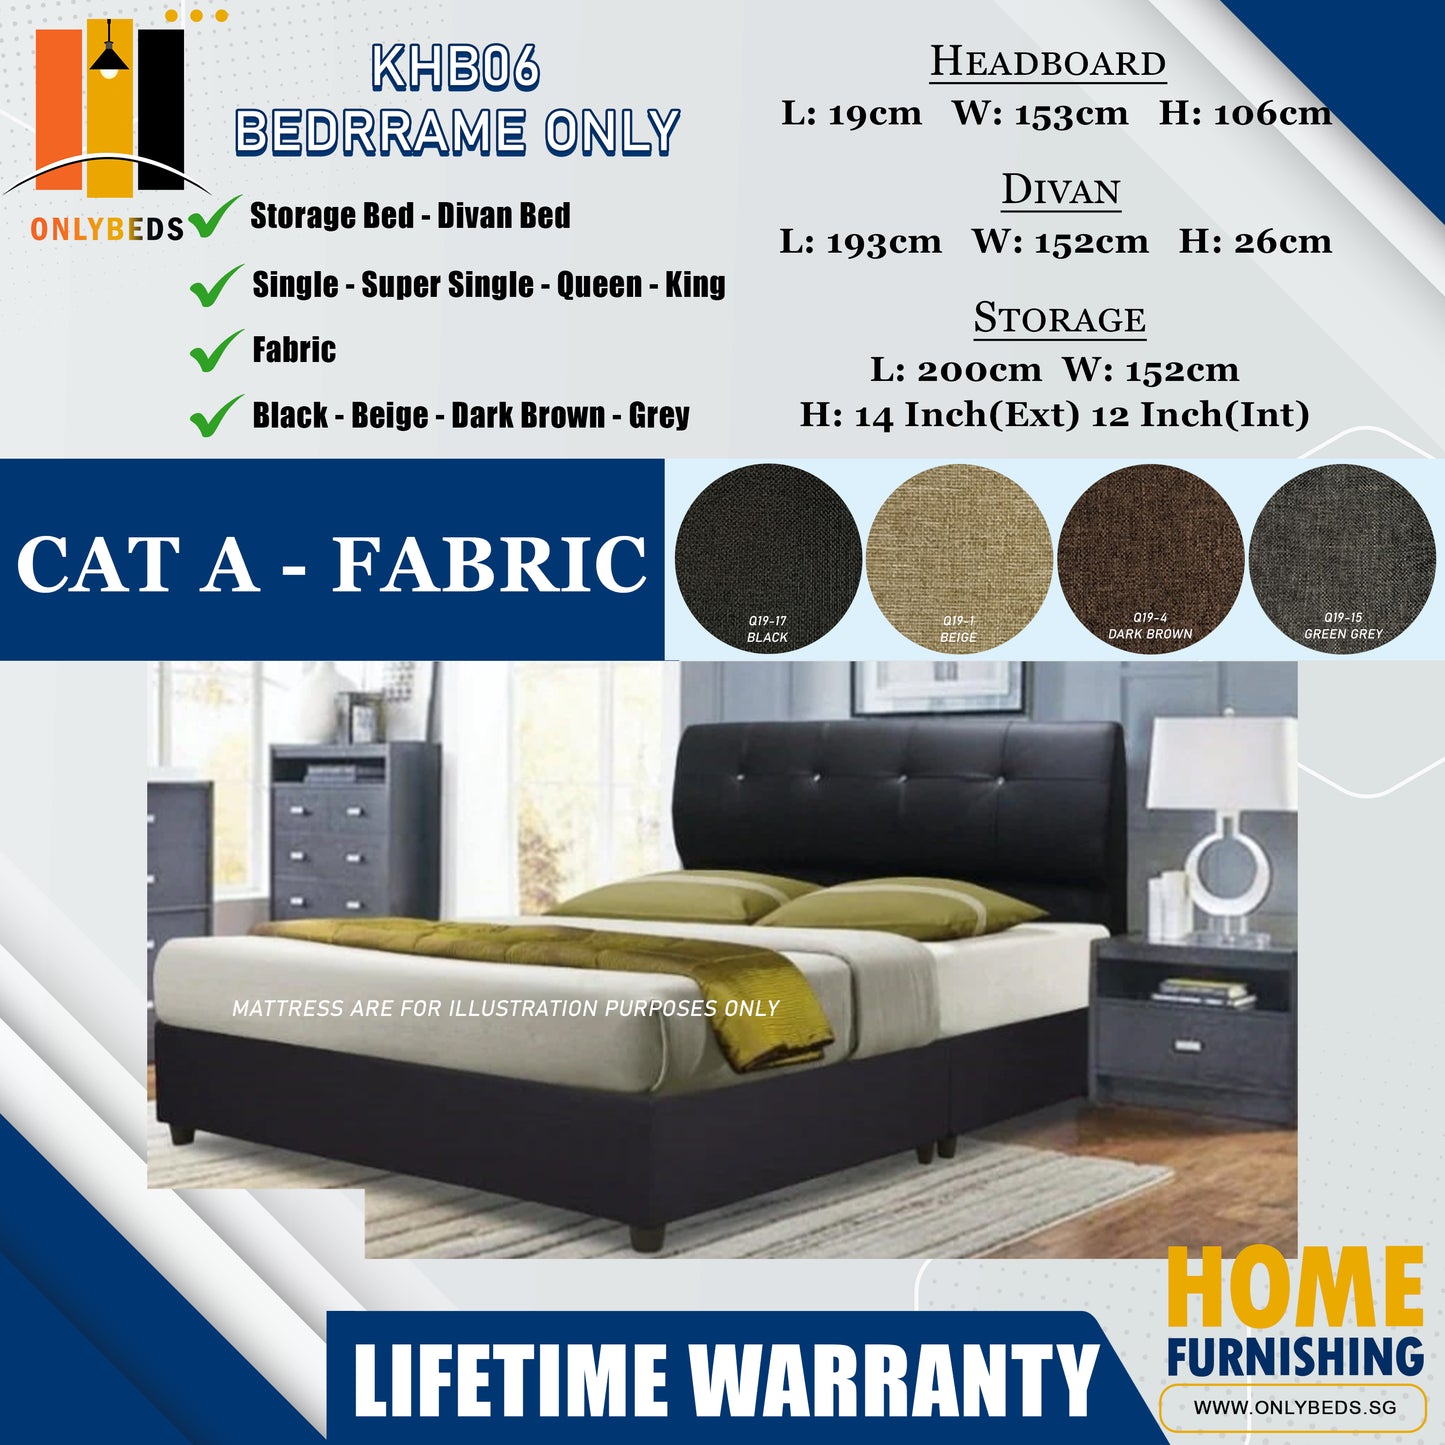 Storage Bedframe with Headboard only l KHB06 l Cat A